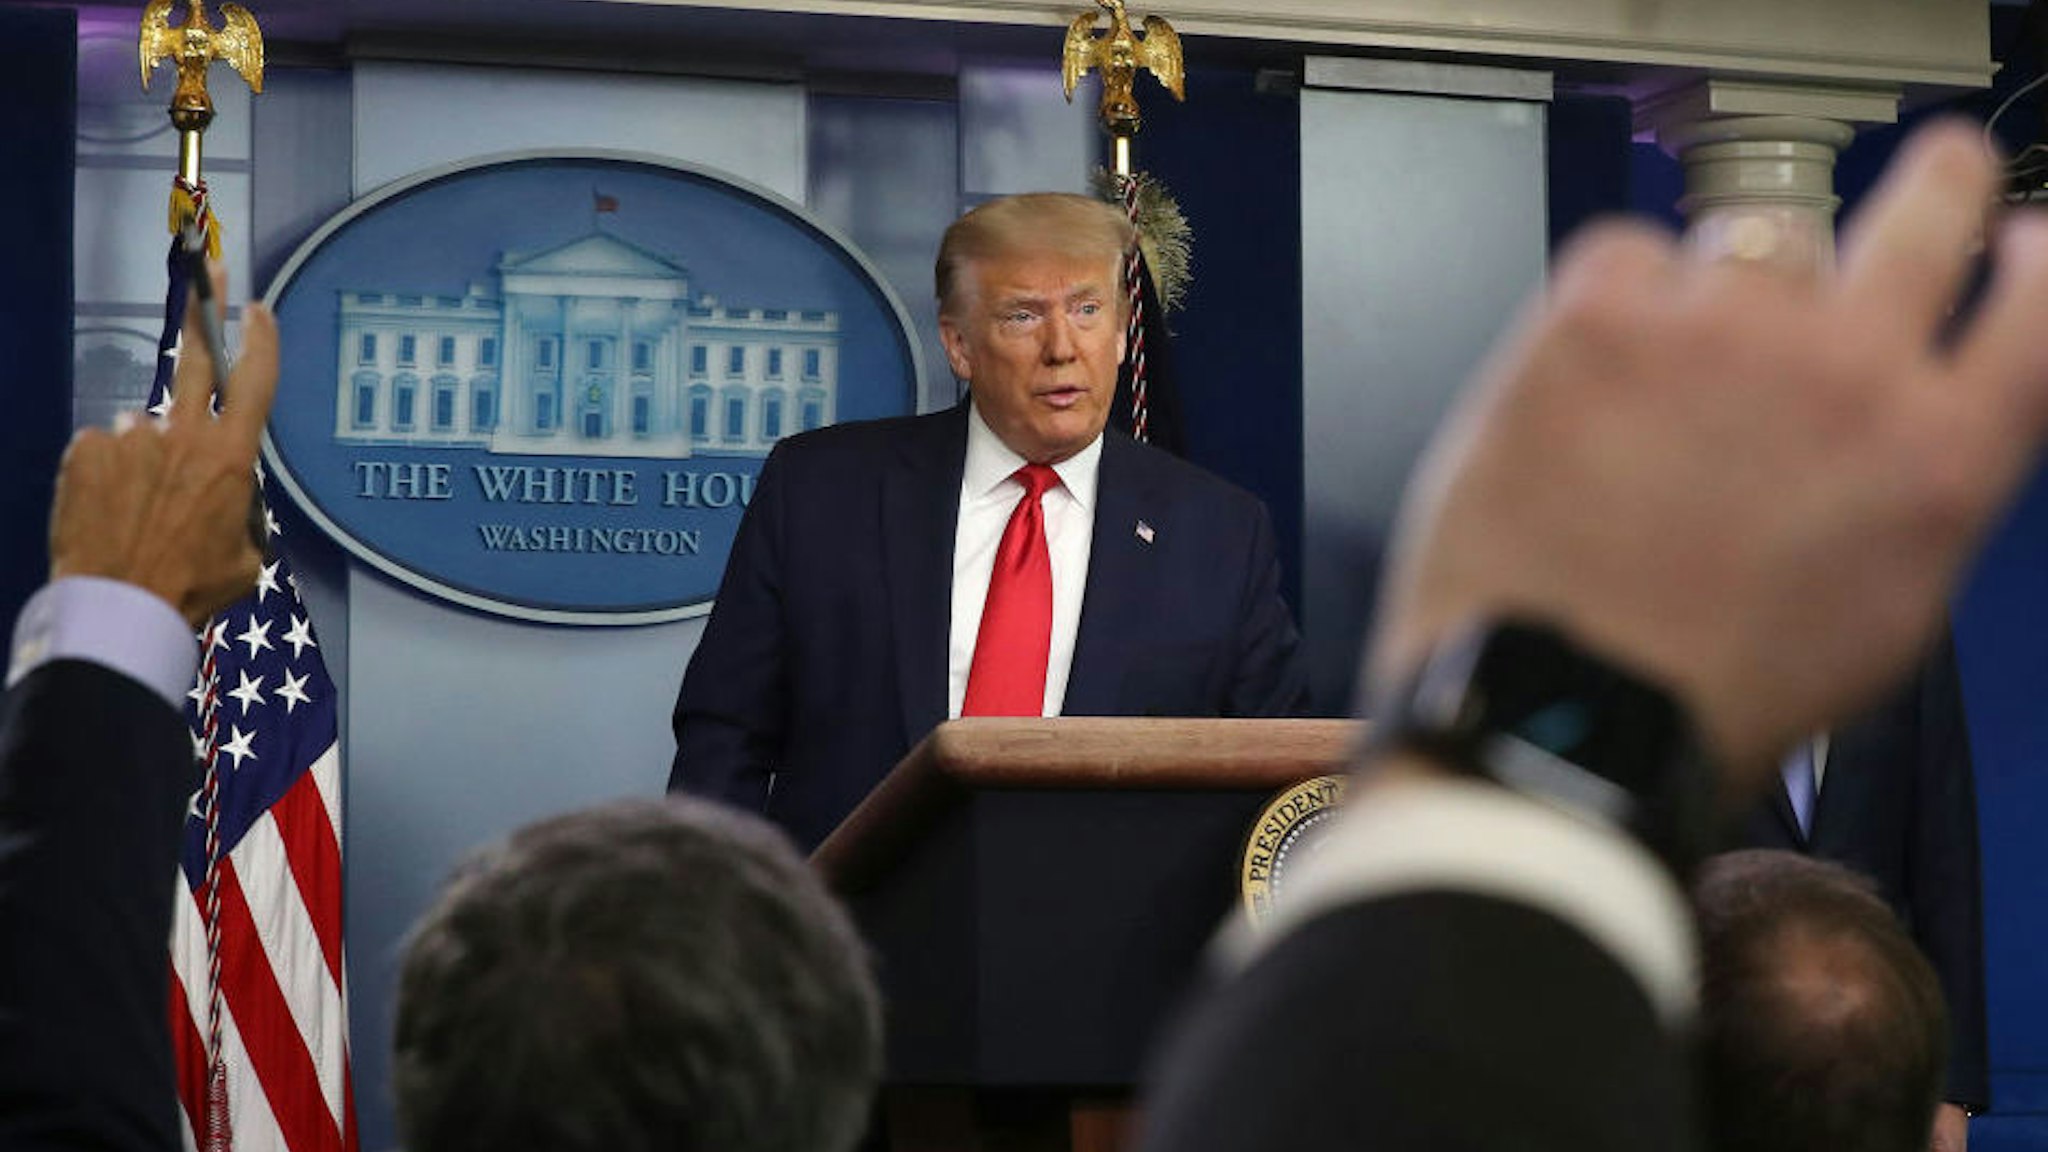 U.S. President Donald Trump speaks to the media in the briefing room at the White House on July 2, 2020 in Washington, DC. President Trump spoke about the economy and recent jobs numbers as well as the administration's response to the coronavirus. (Photo by Chip Somodevilla/Getty Images)